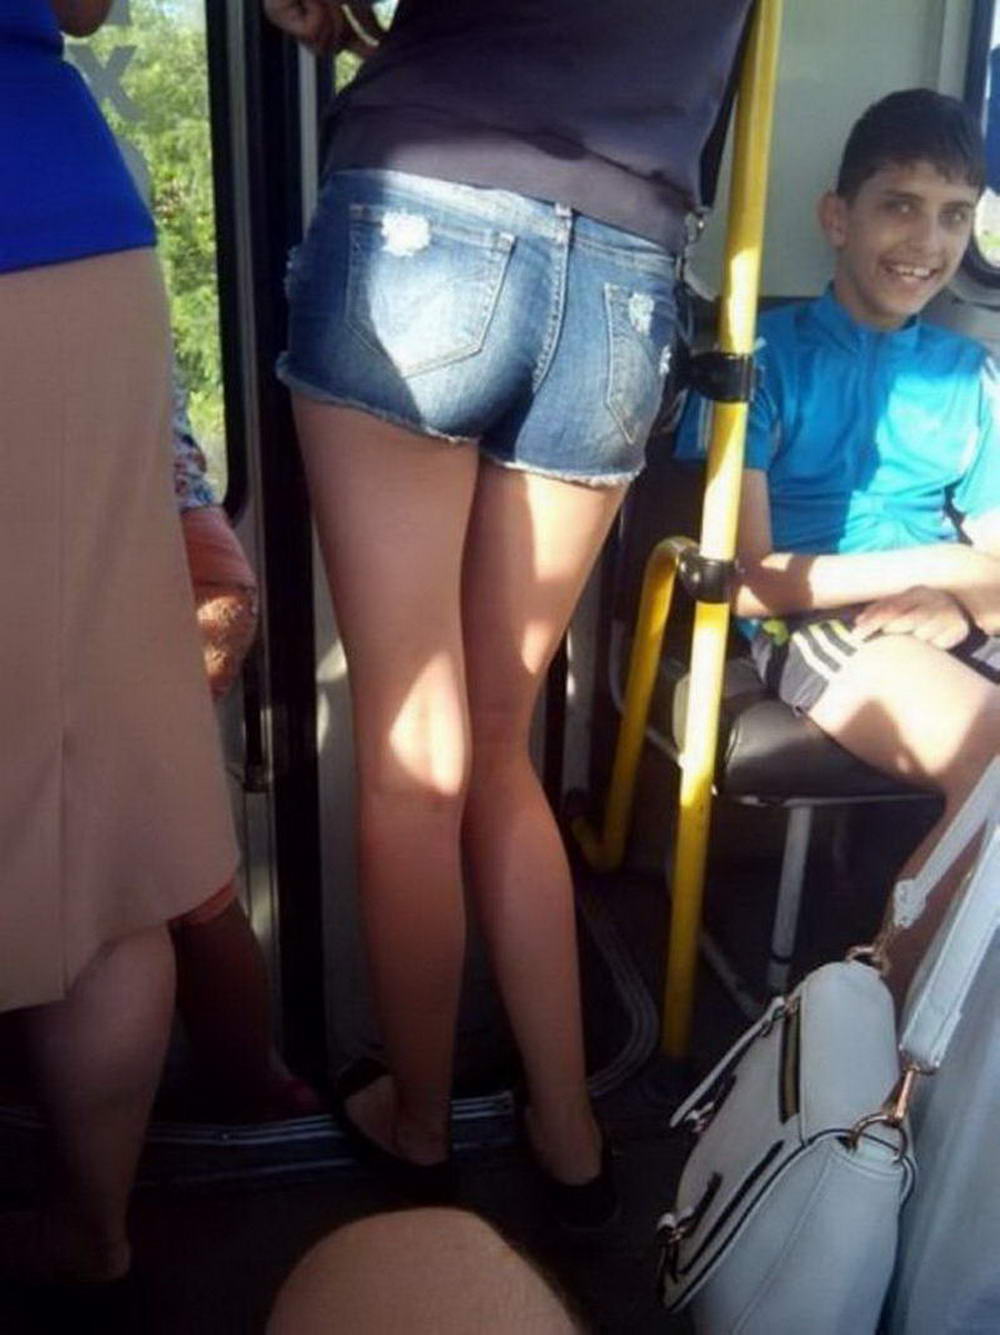 kid on bus smiling about women standing next to him